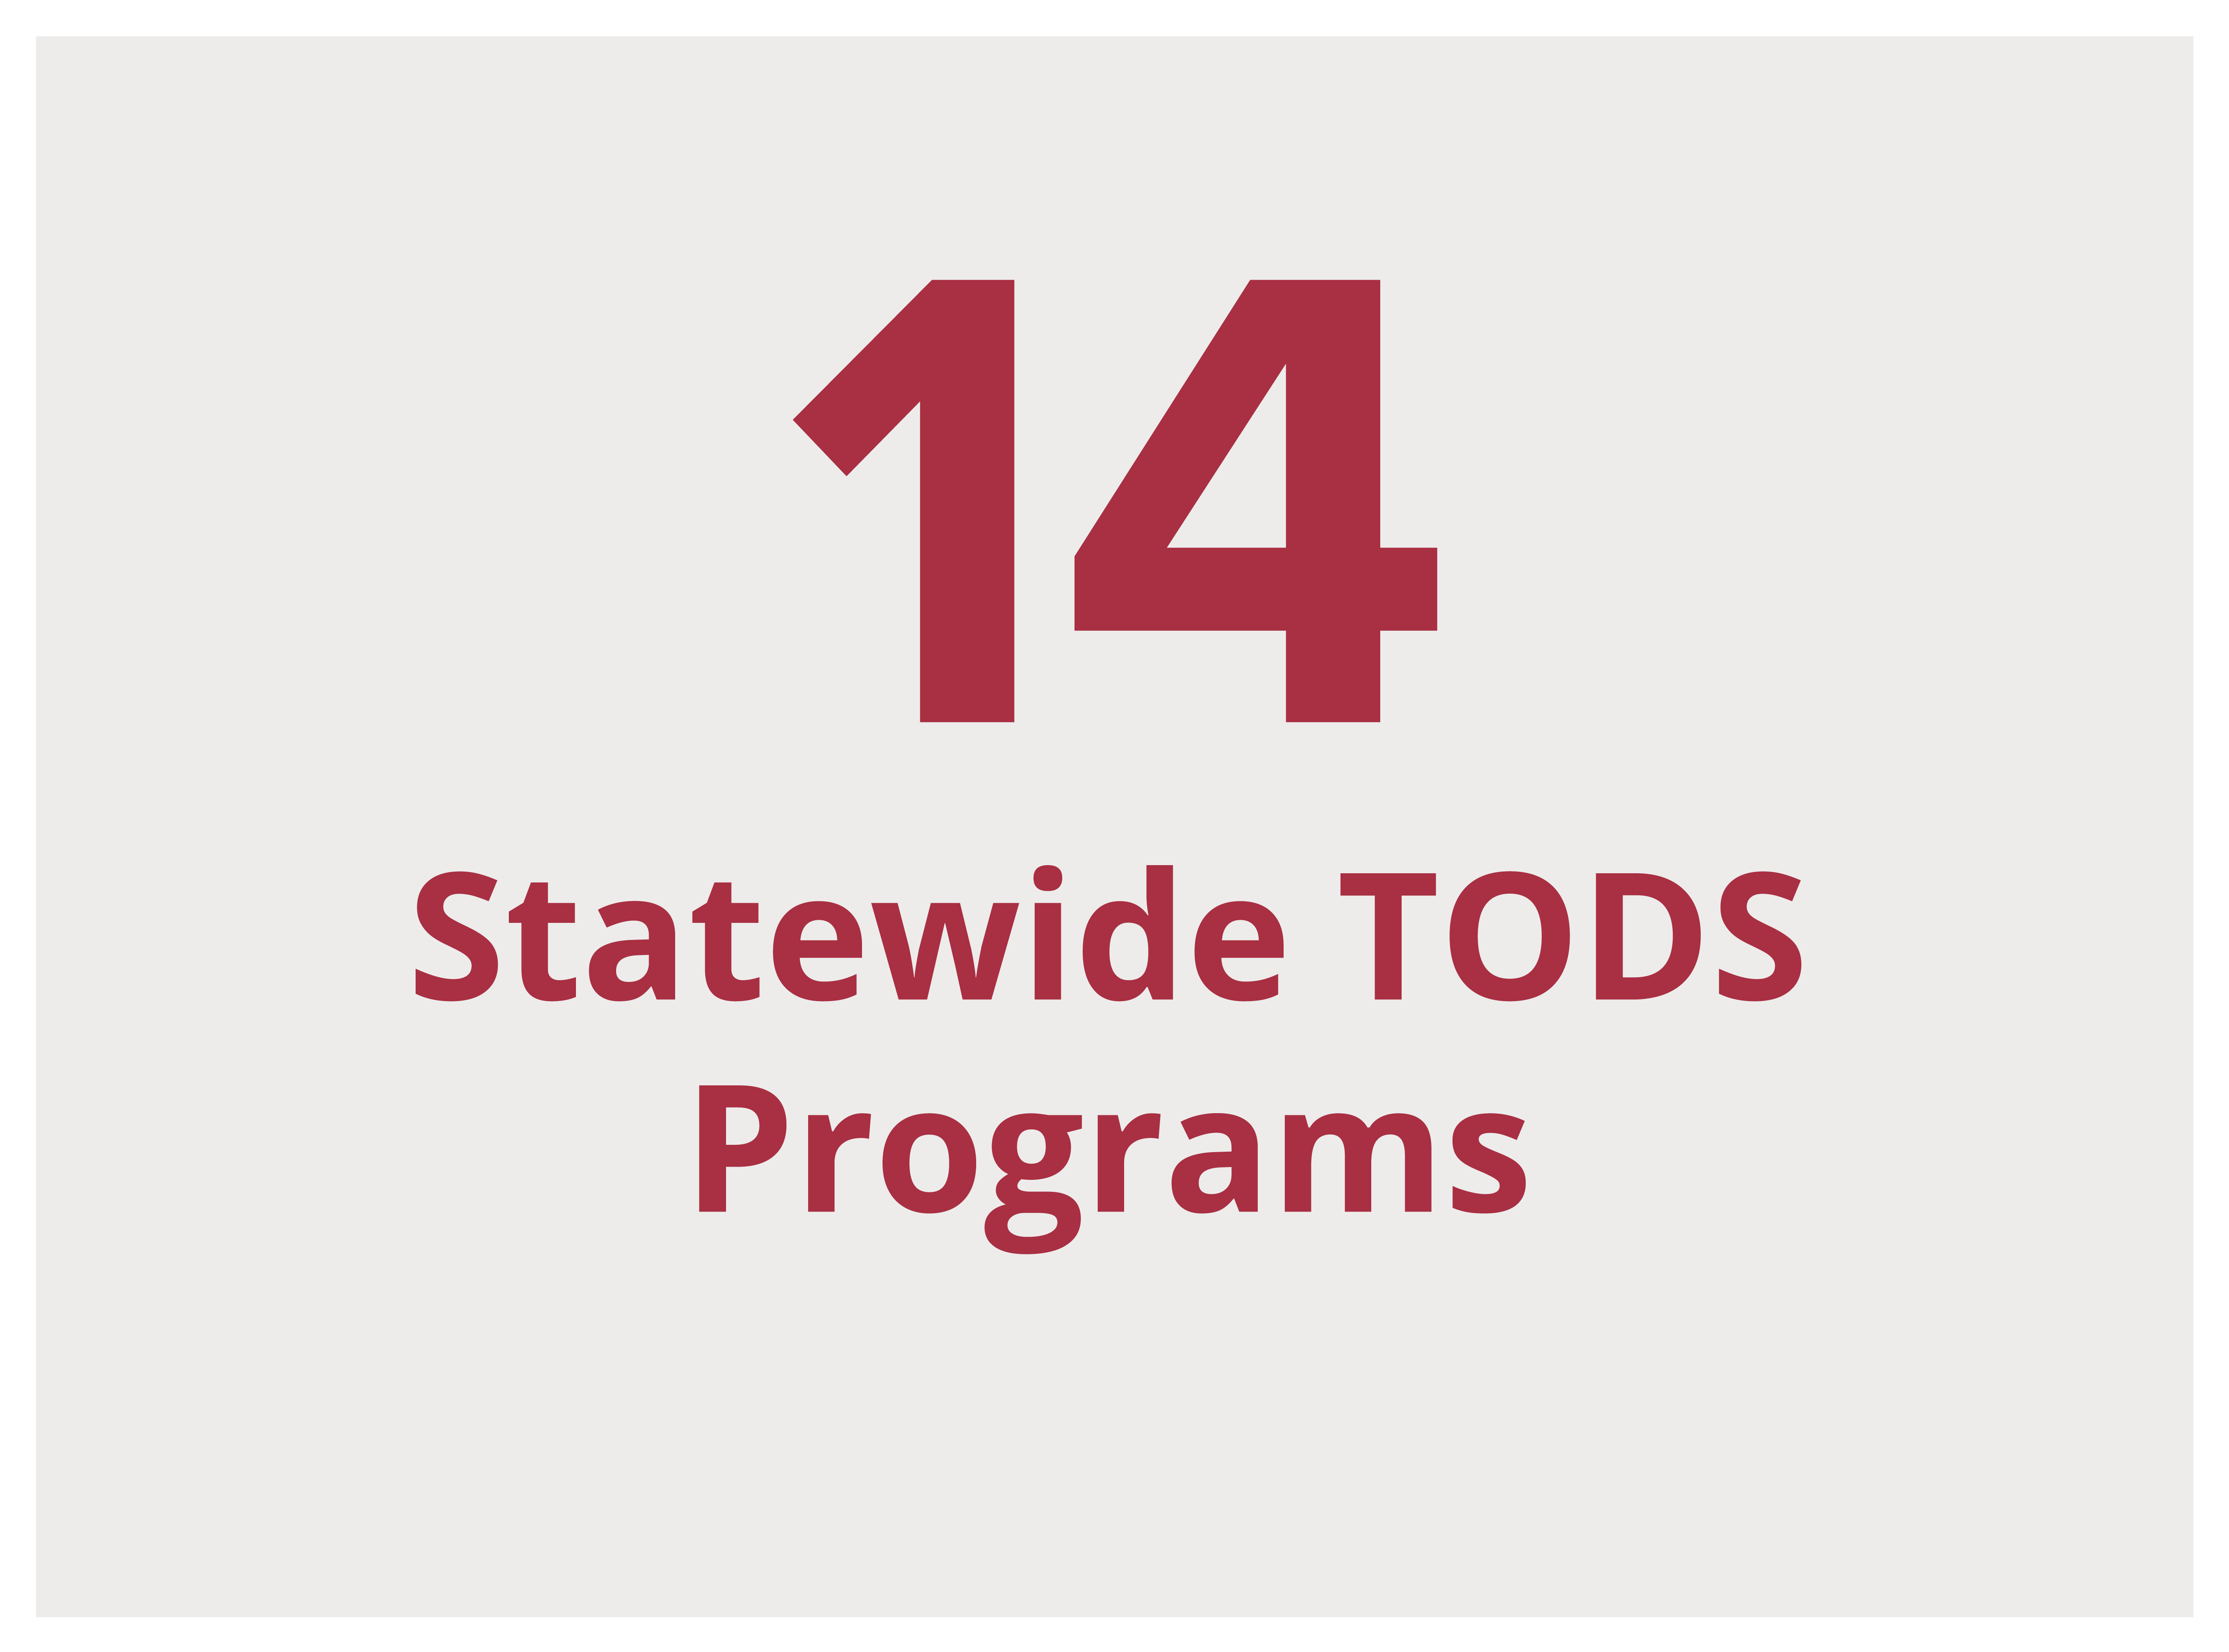 14 Statewide TODS Programs